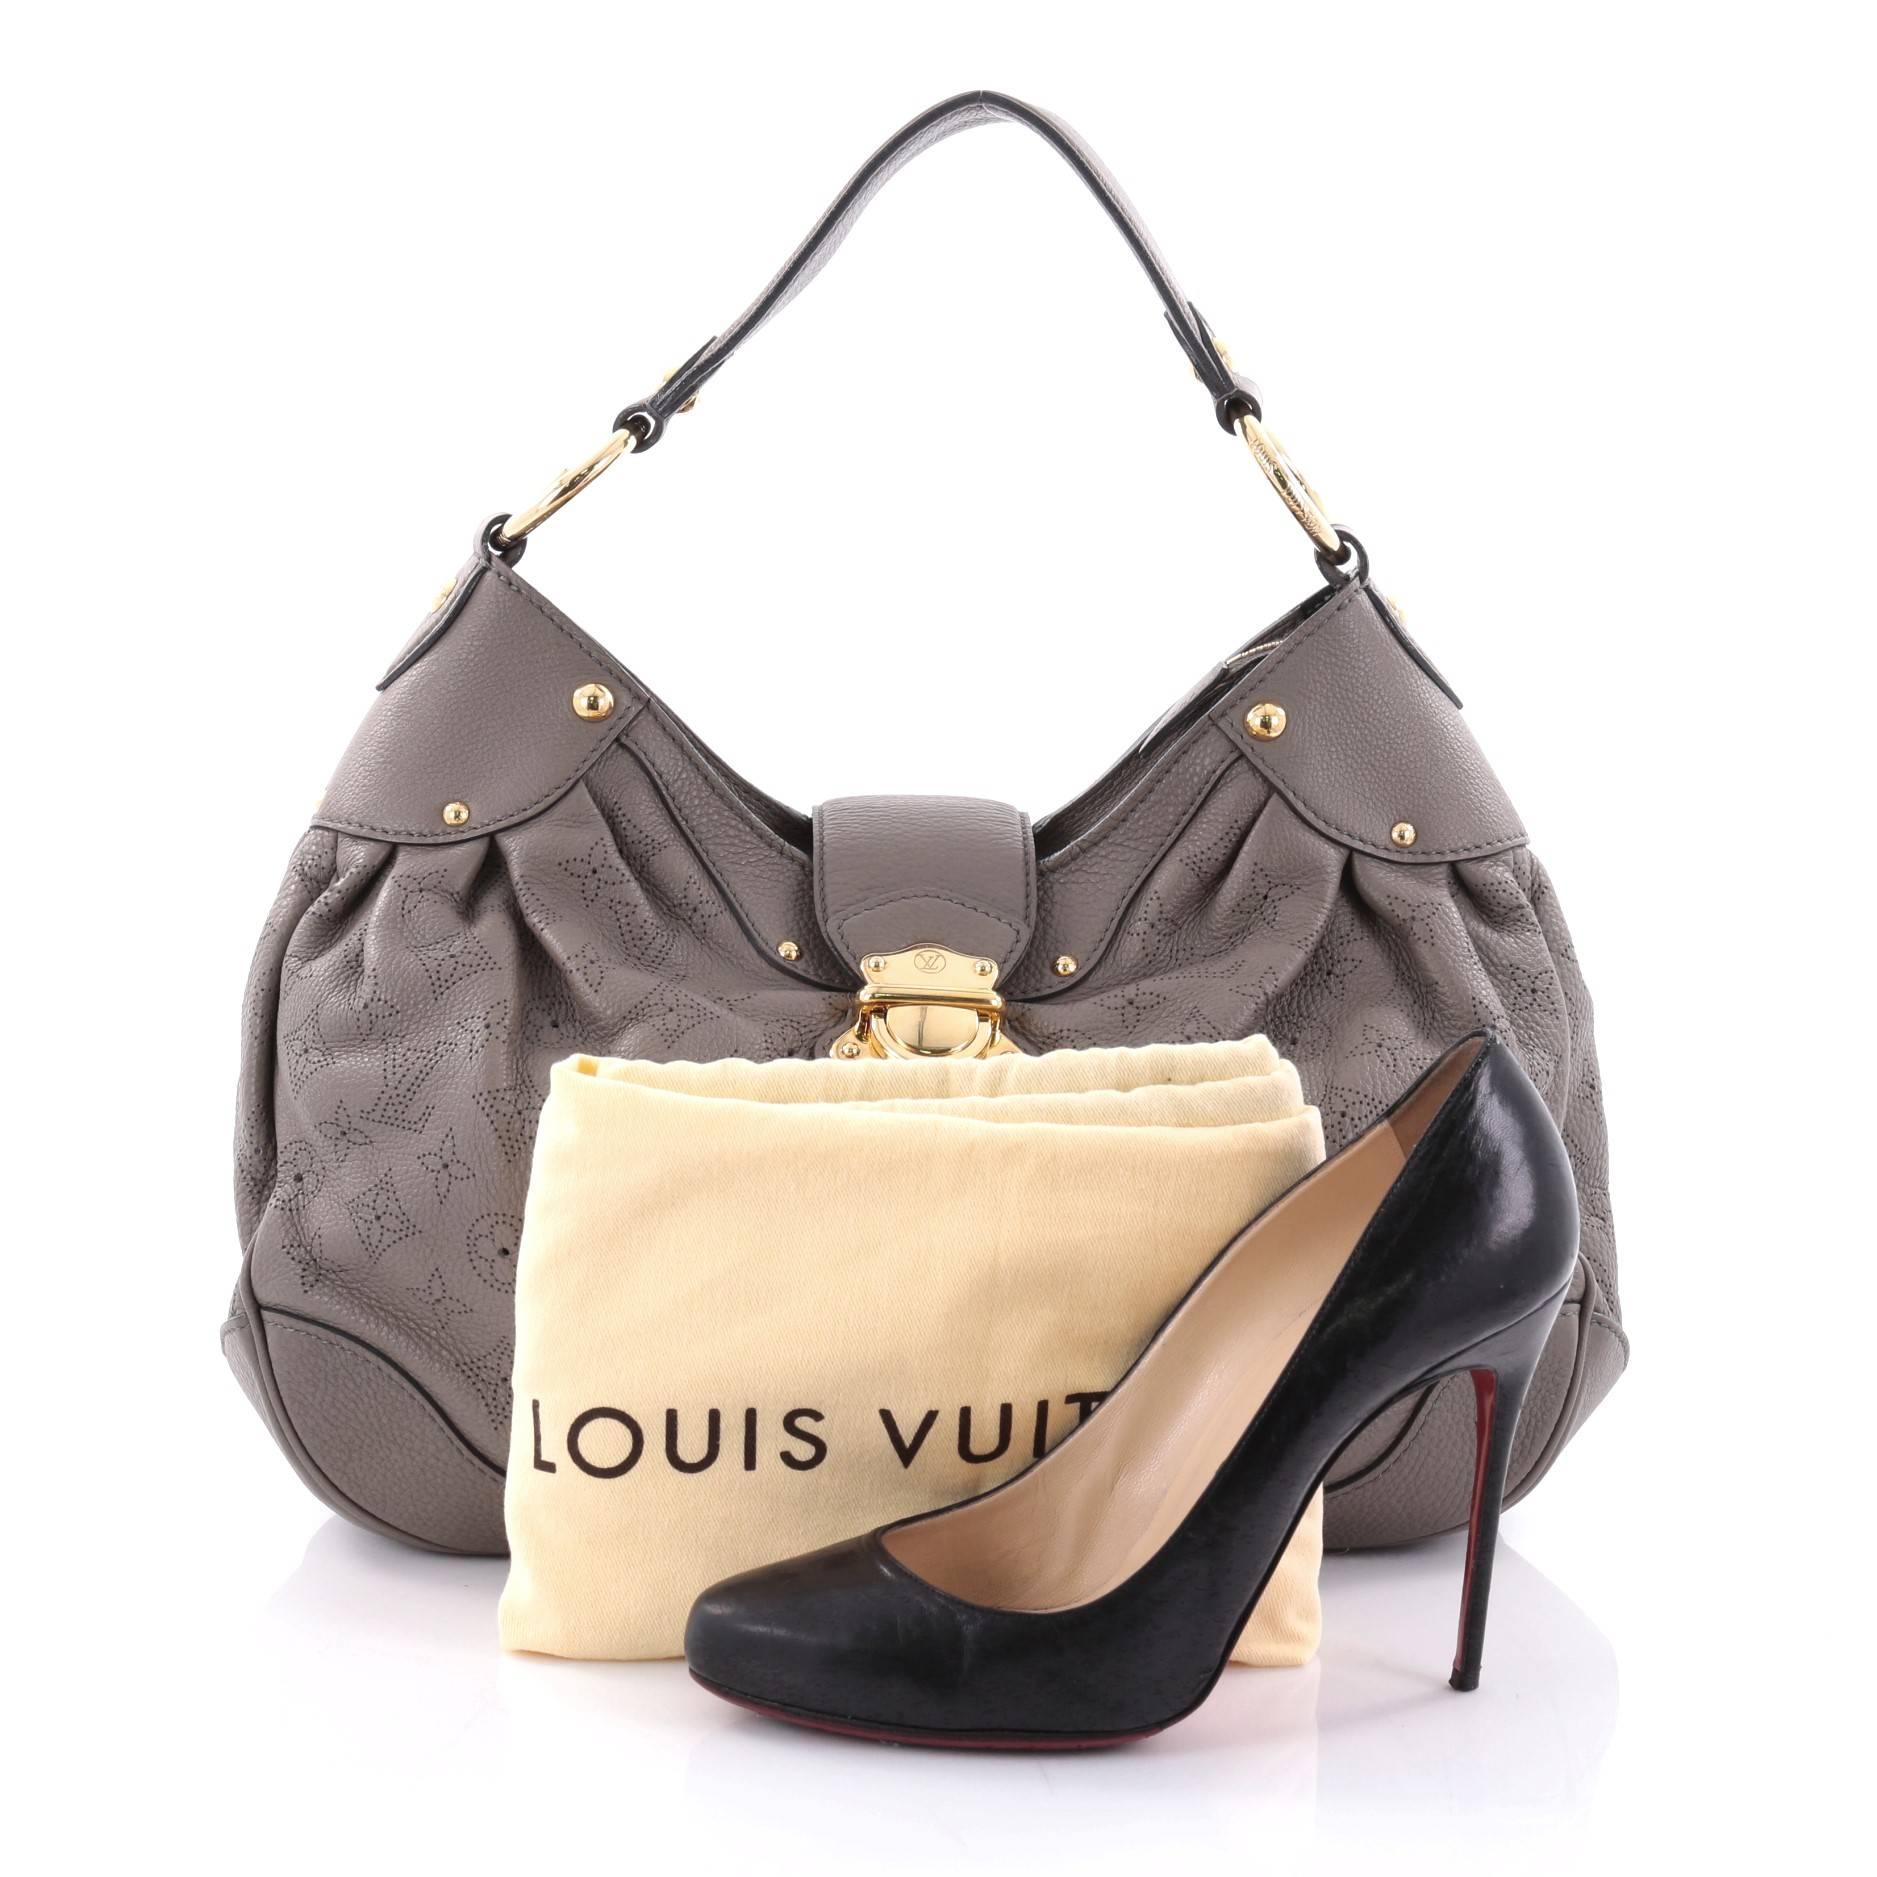 This authentic Louis Vuitton Solar Handbag Mahina Leather PM is an easy, feminine design constructed with intricate gray perforated monogram mahina leather. Showcased in the brand's Spring/ Summer 2010 Collection, this roomy hobo features a